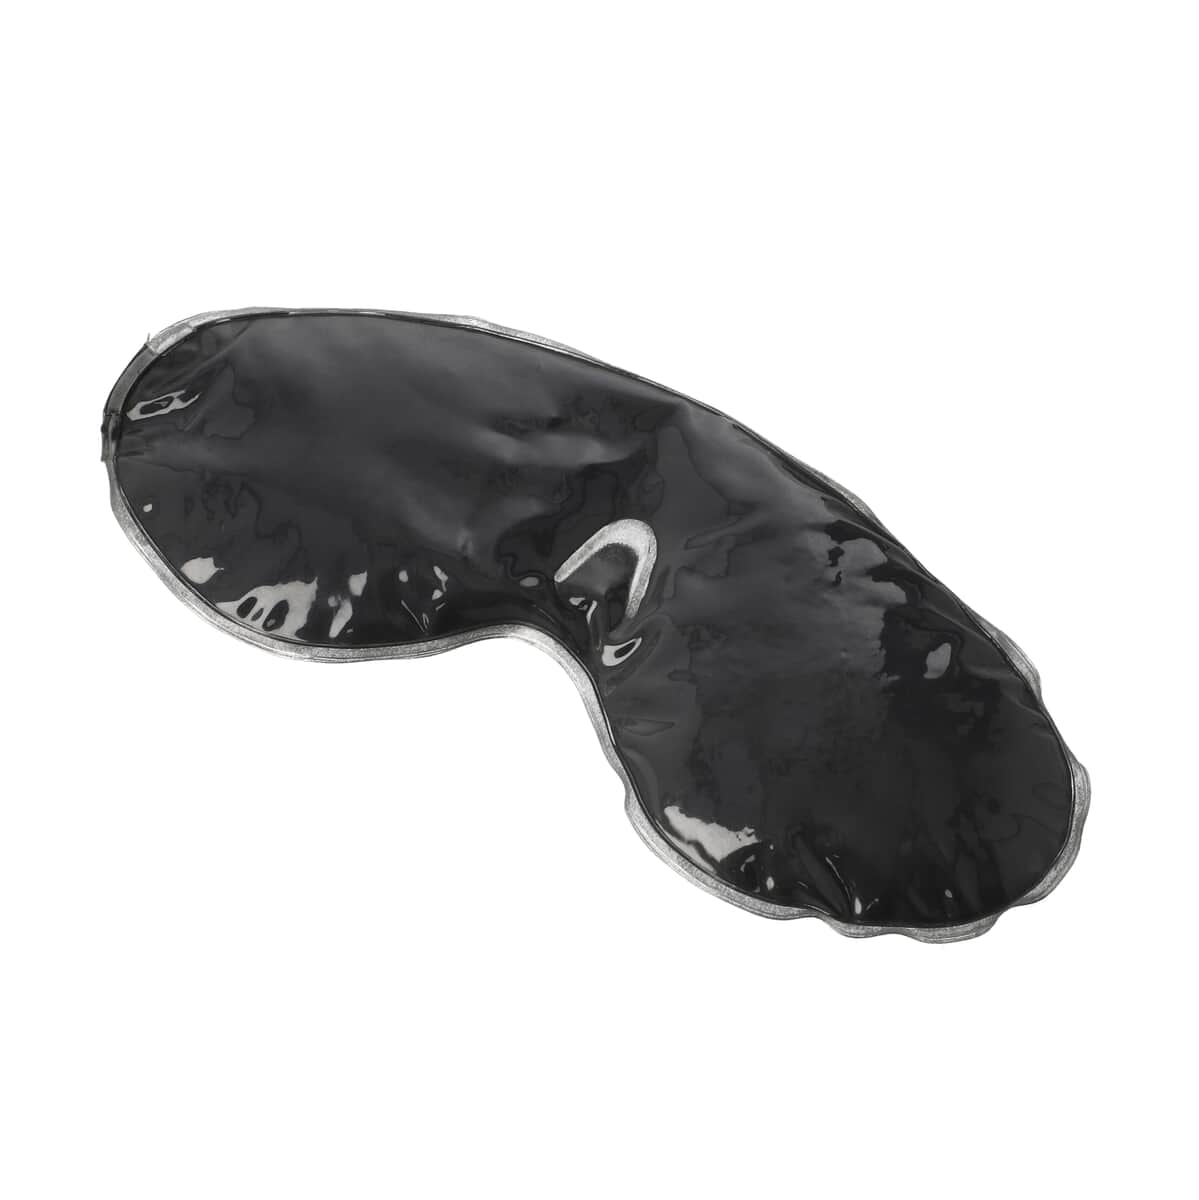 Multi Color Printed Cotton, Shungite Weighted Reusable Eye Mask (L8xW3) with Shungite Gel Sleeve and Adjustable Strap image number 4